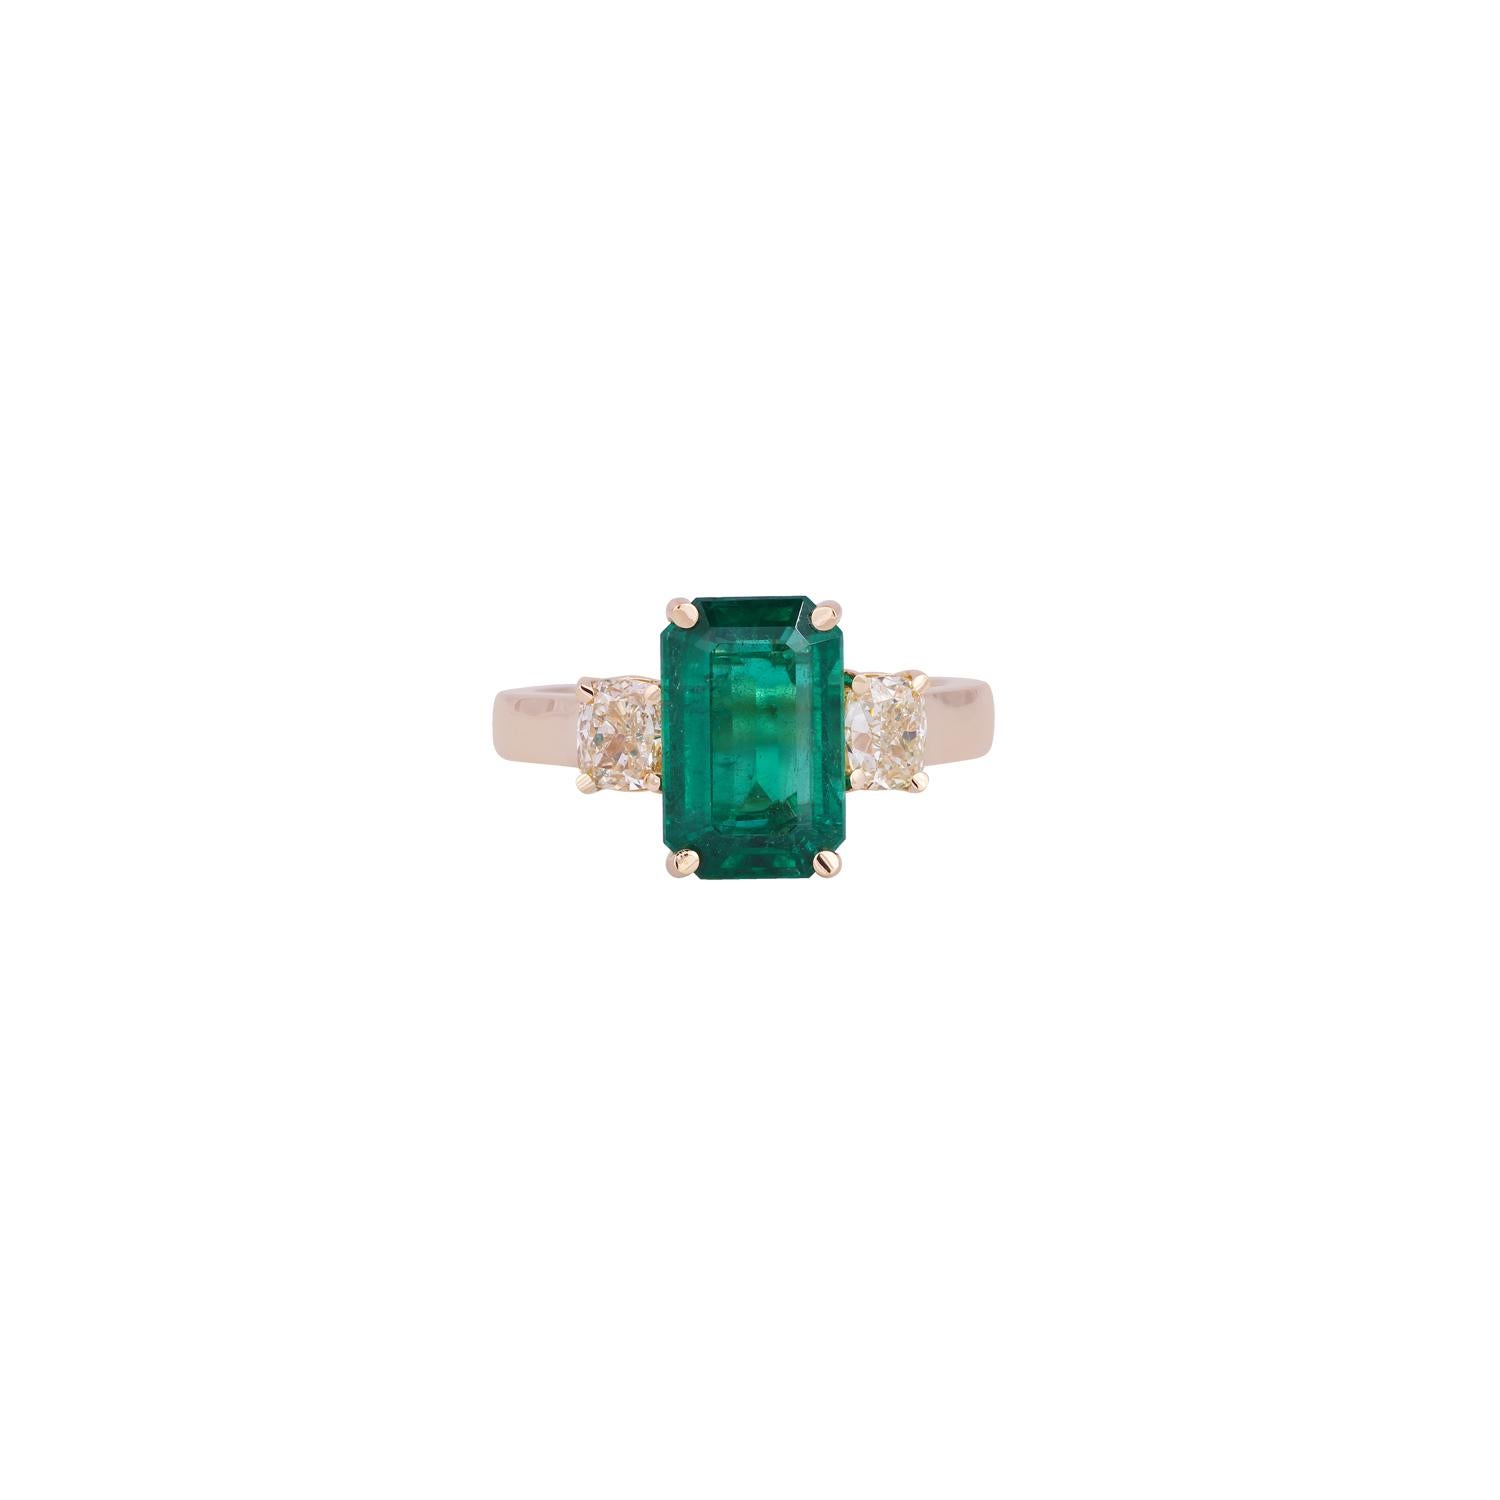 This is an elegant emerald & diamond ring studded in 18k yellow gold features a fine quality of octagon-shaped emerald weight 3.34 carats with 2 pieces of cushion-shaped mutual cut yellow diamonds weight 0.95 carats, this entire ring is made in 18k